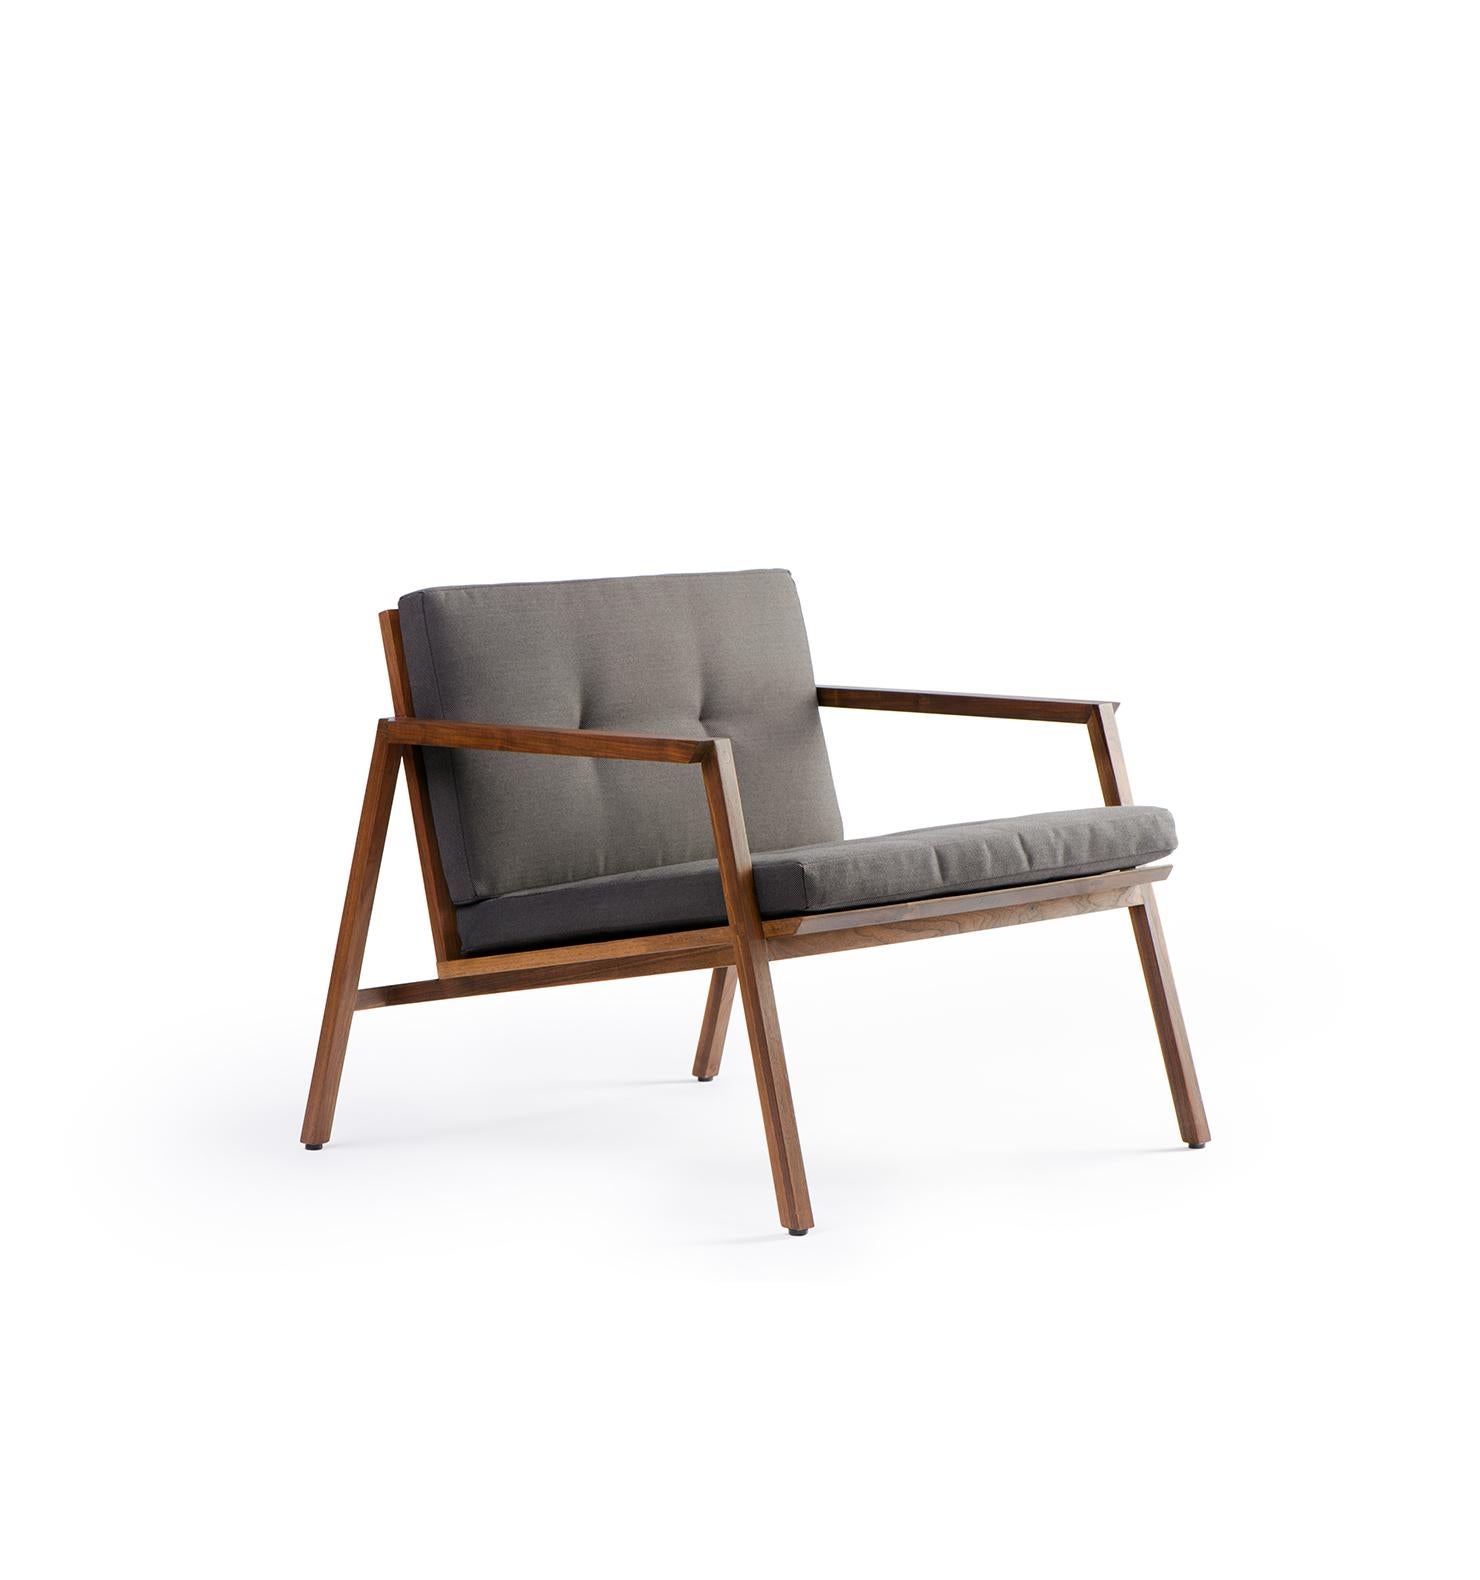 Tumbona Dedo, Mexican Contemporary Lounge Chair by Emiliano Molina for CUCHARA For Sale 6